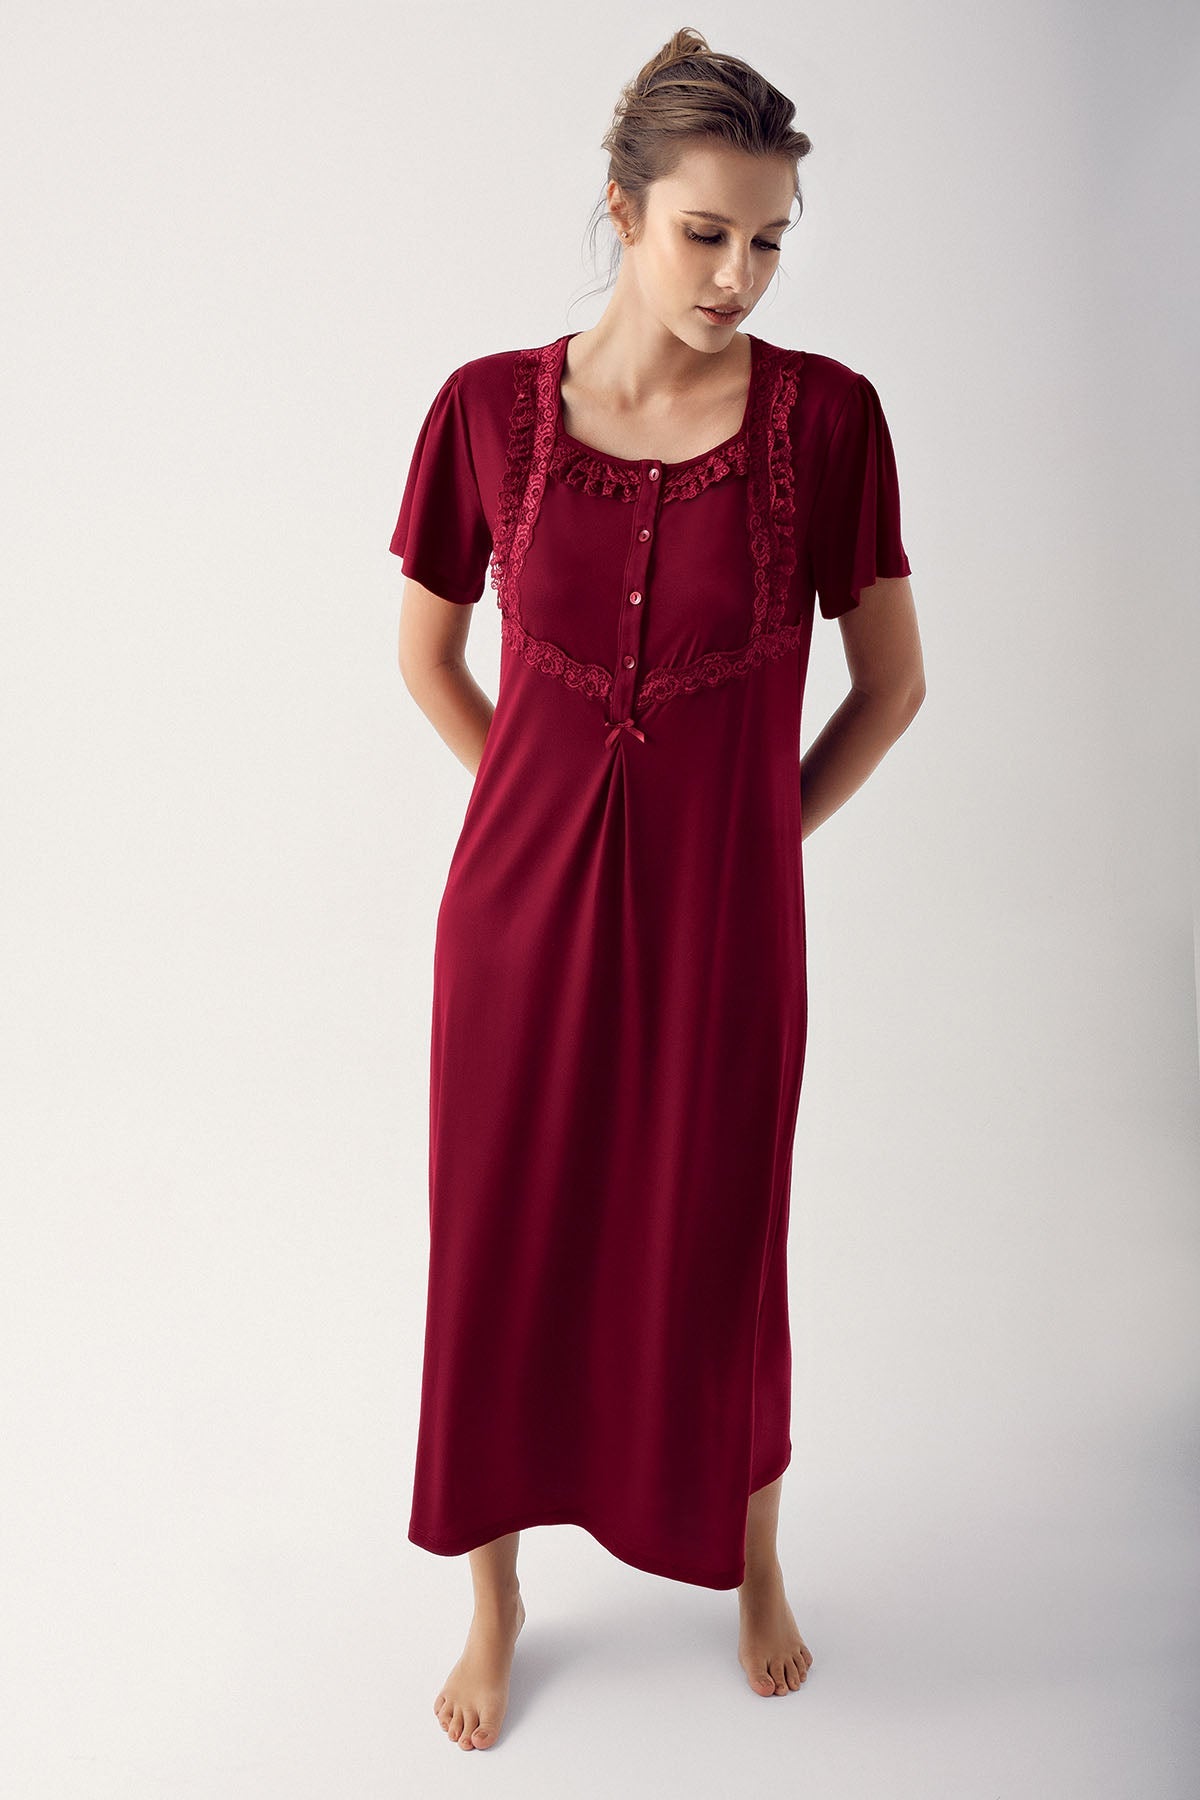 Square Collar Lace Plus Size Maternity & Nursing Nightgown Claret Red - 14110